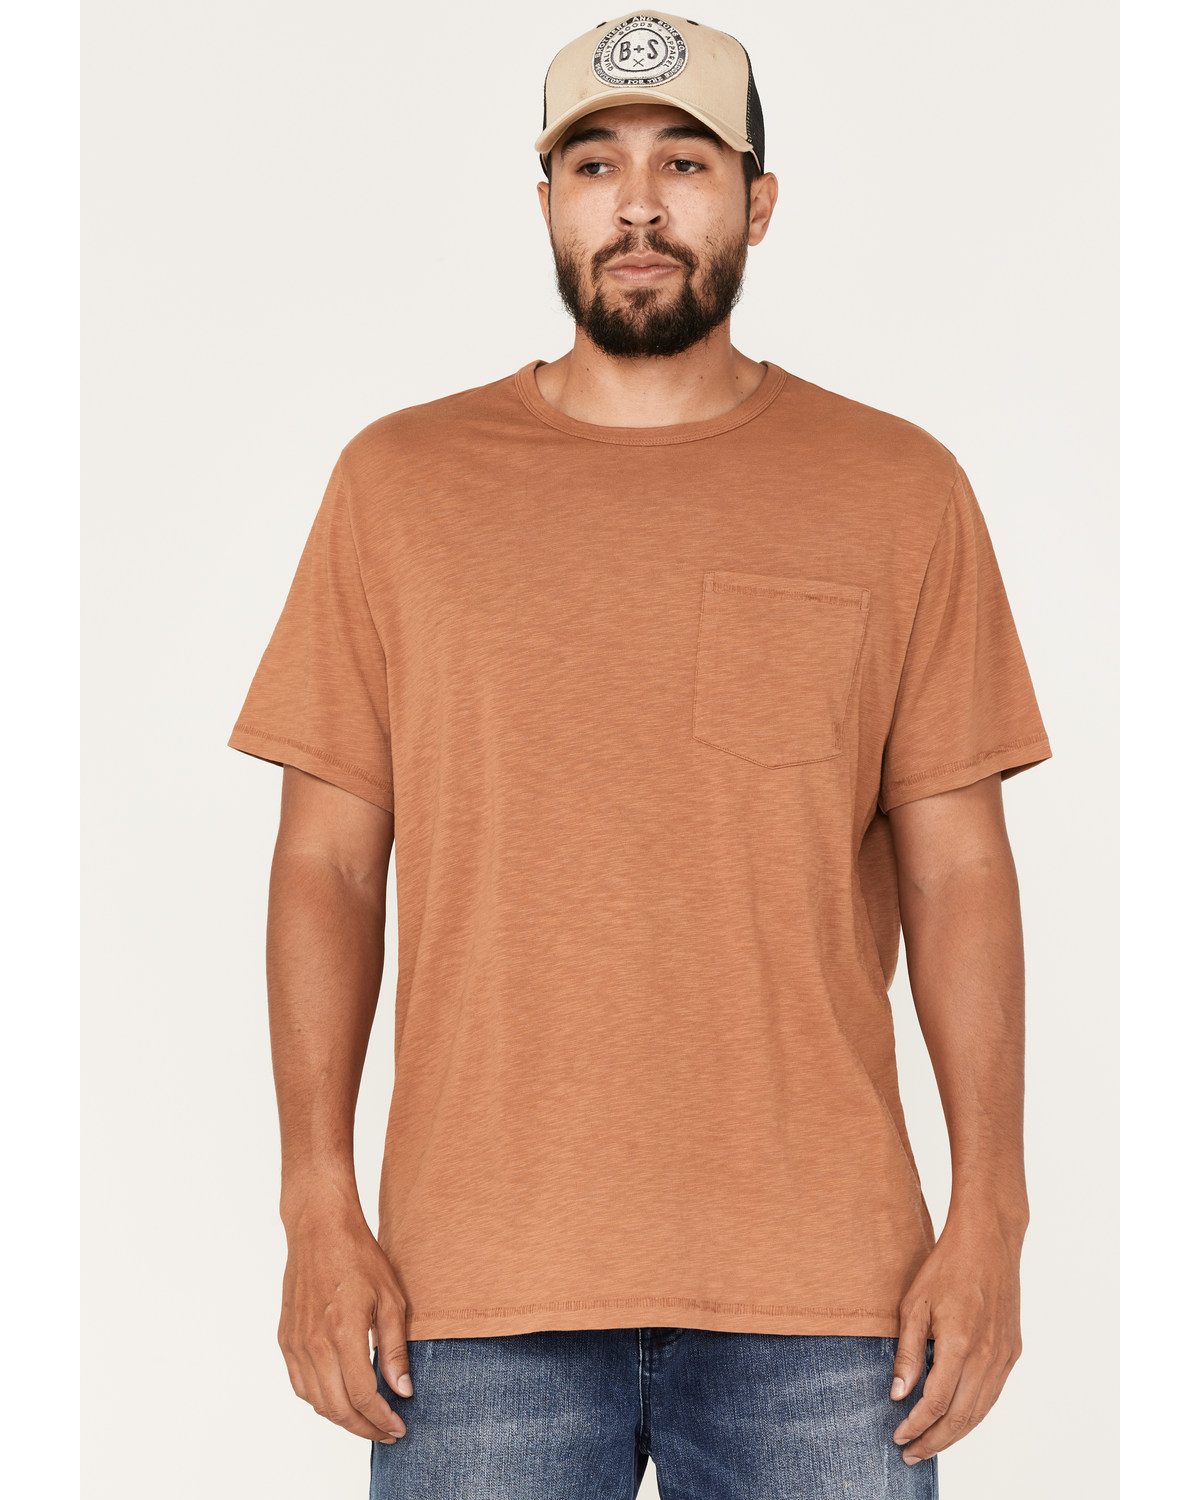 Brothers and Sons Men's Solid Basic Short Sleeve Pocket T-Shirt